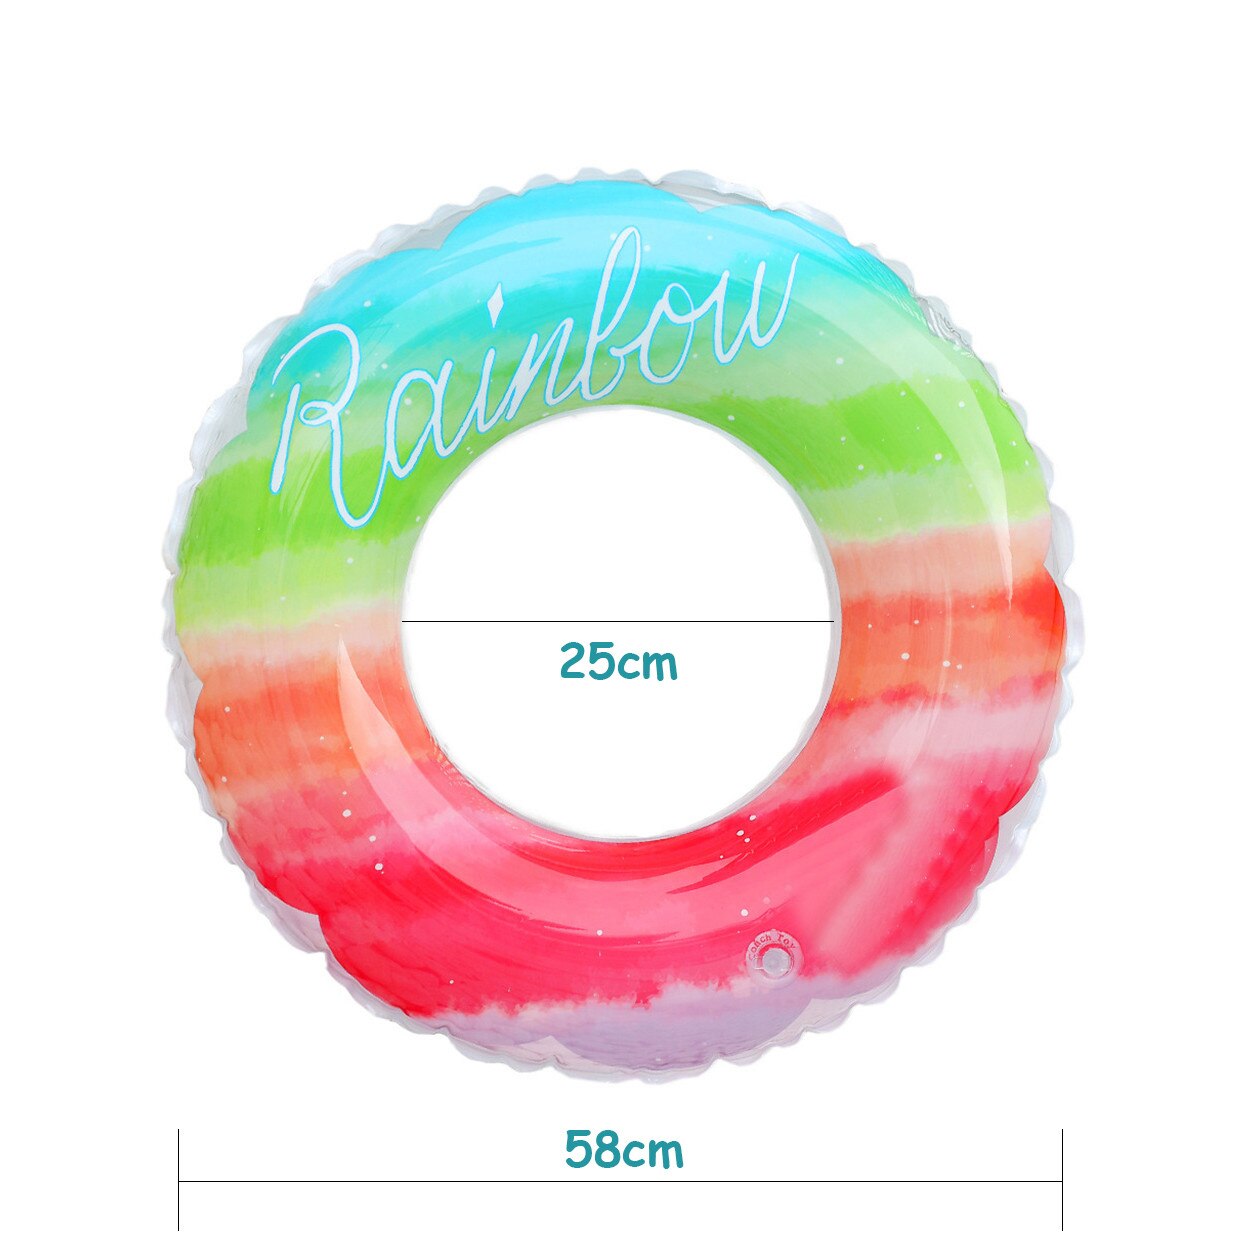 Kids Baby Summer Beach Inflatable Ring Floating Swim Ring Water Toy Rainbow Colorful Safety Swimming Rings For Pool River Beach: 5-9 Years